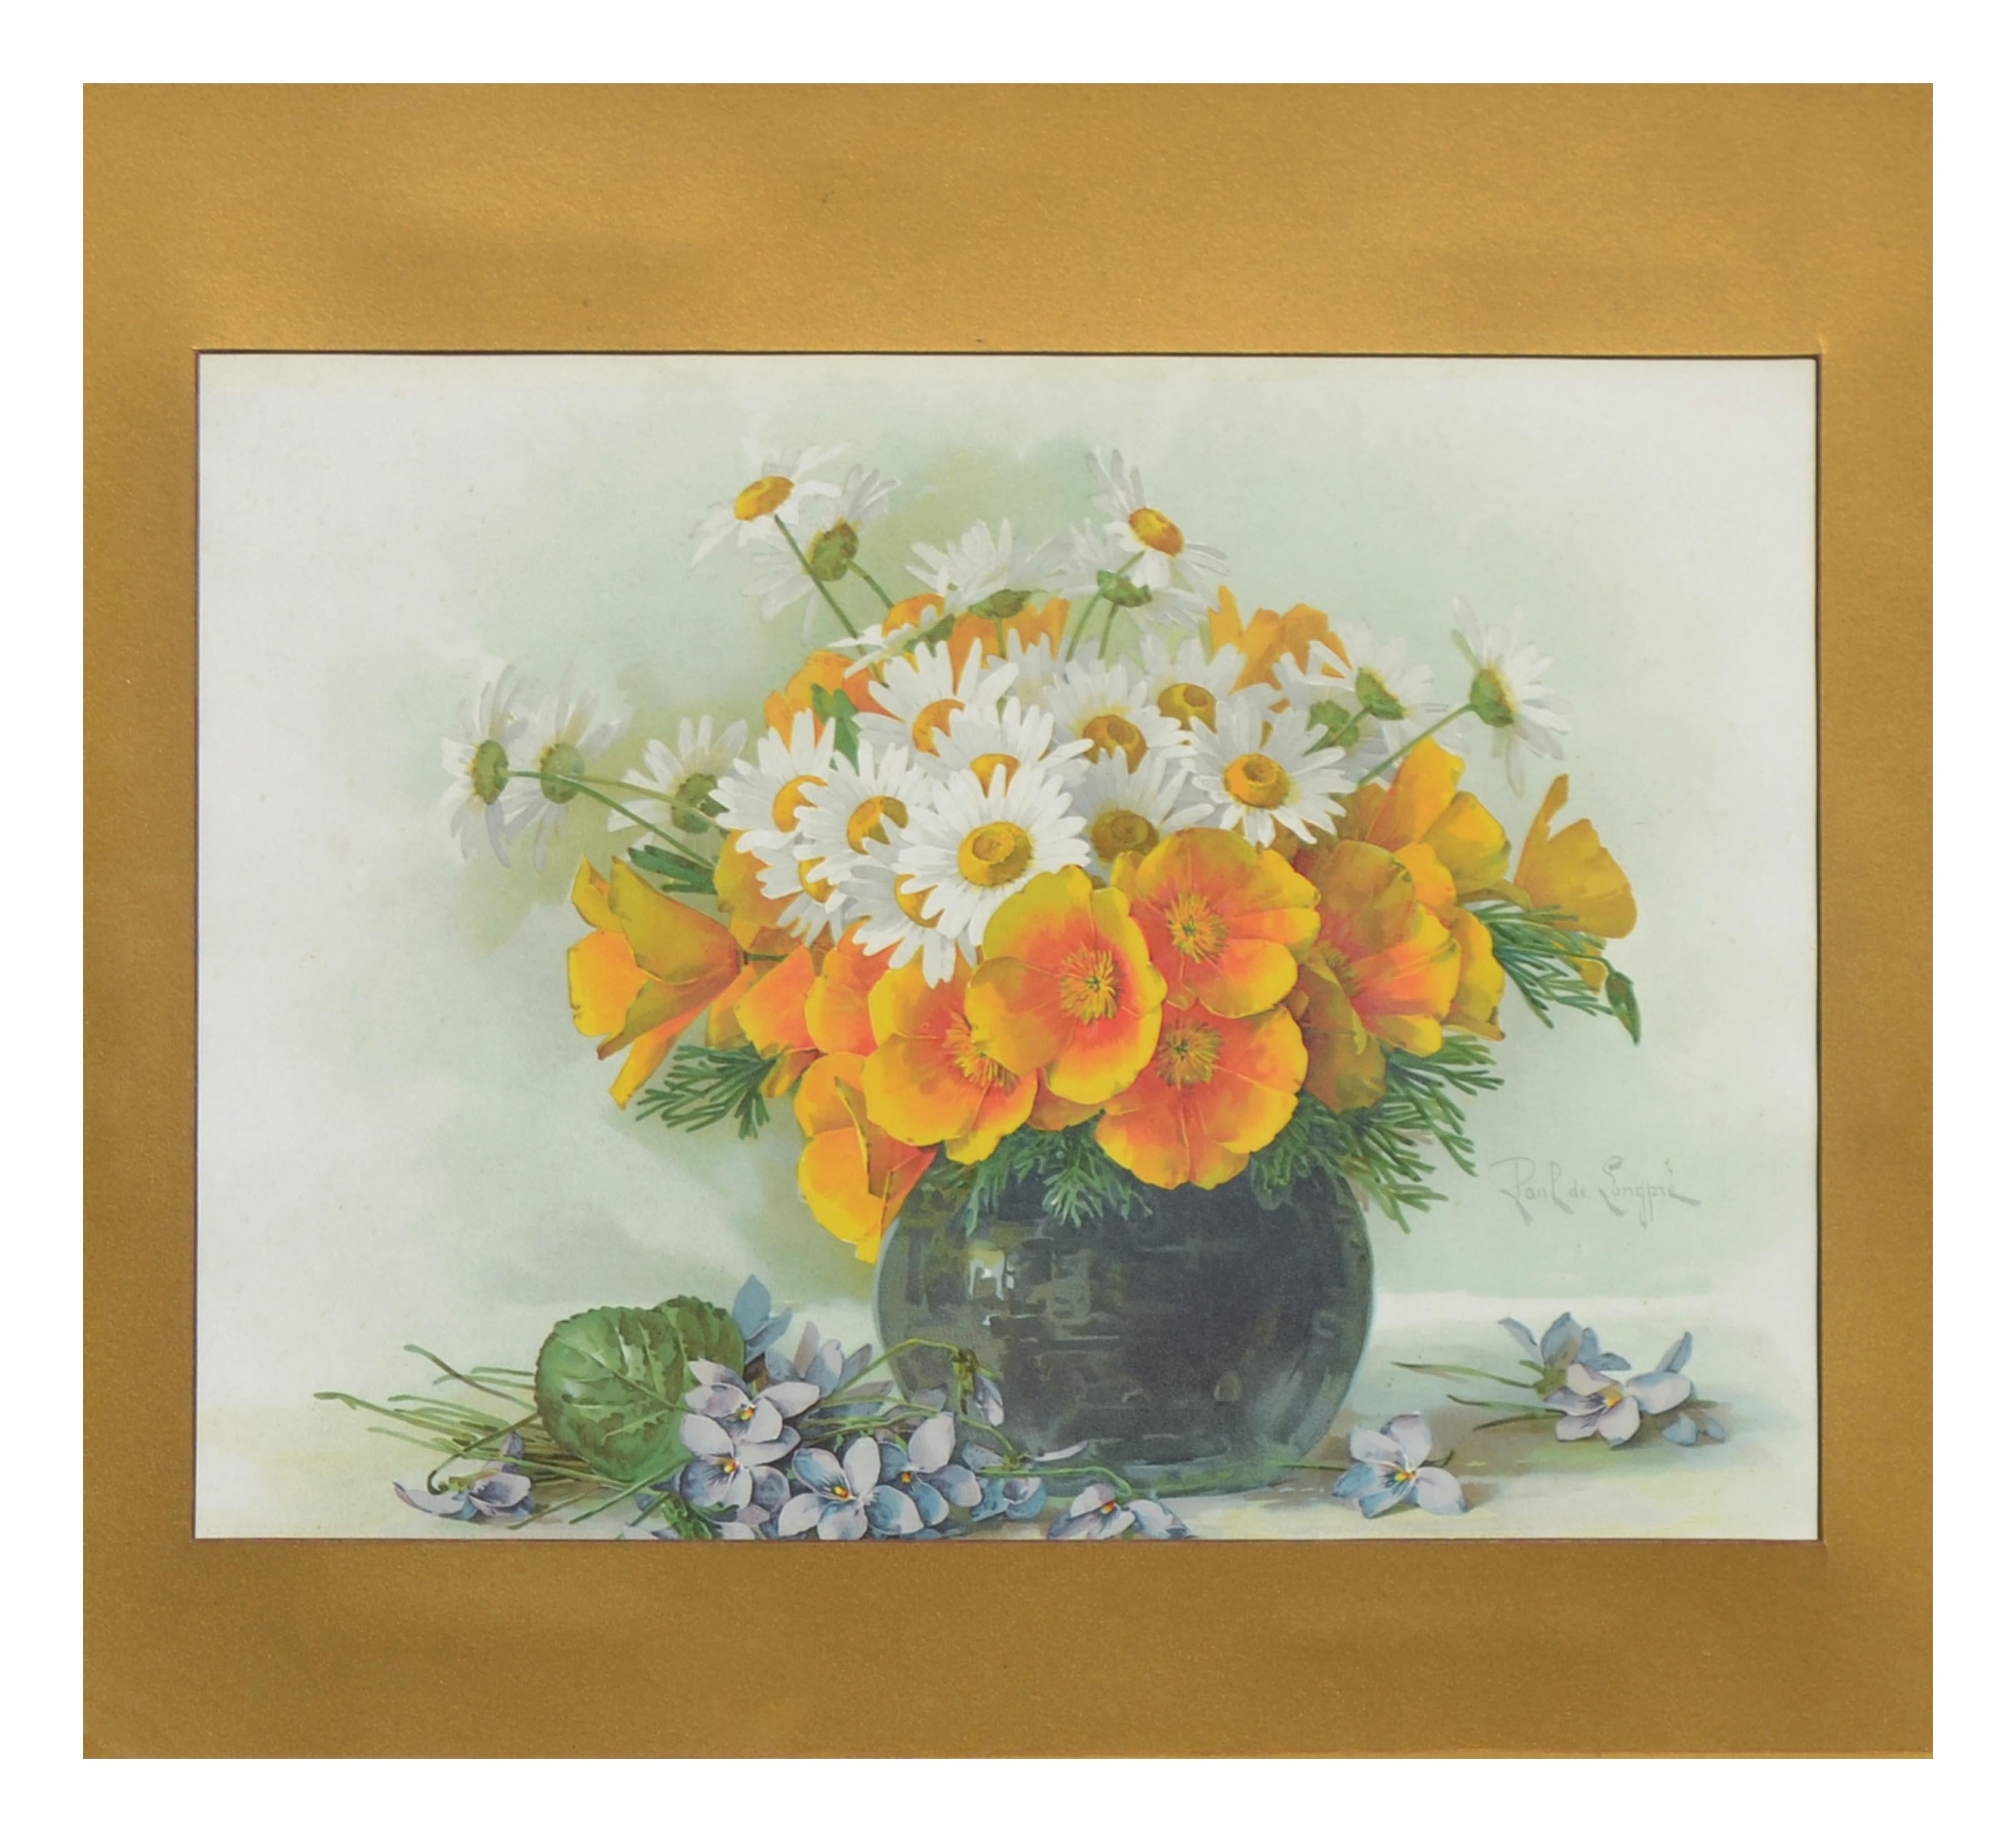 Late 19th Ccentury Chromolithograph of Daisies and California Poppies Still Life - Print by Paul de Longpre